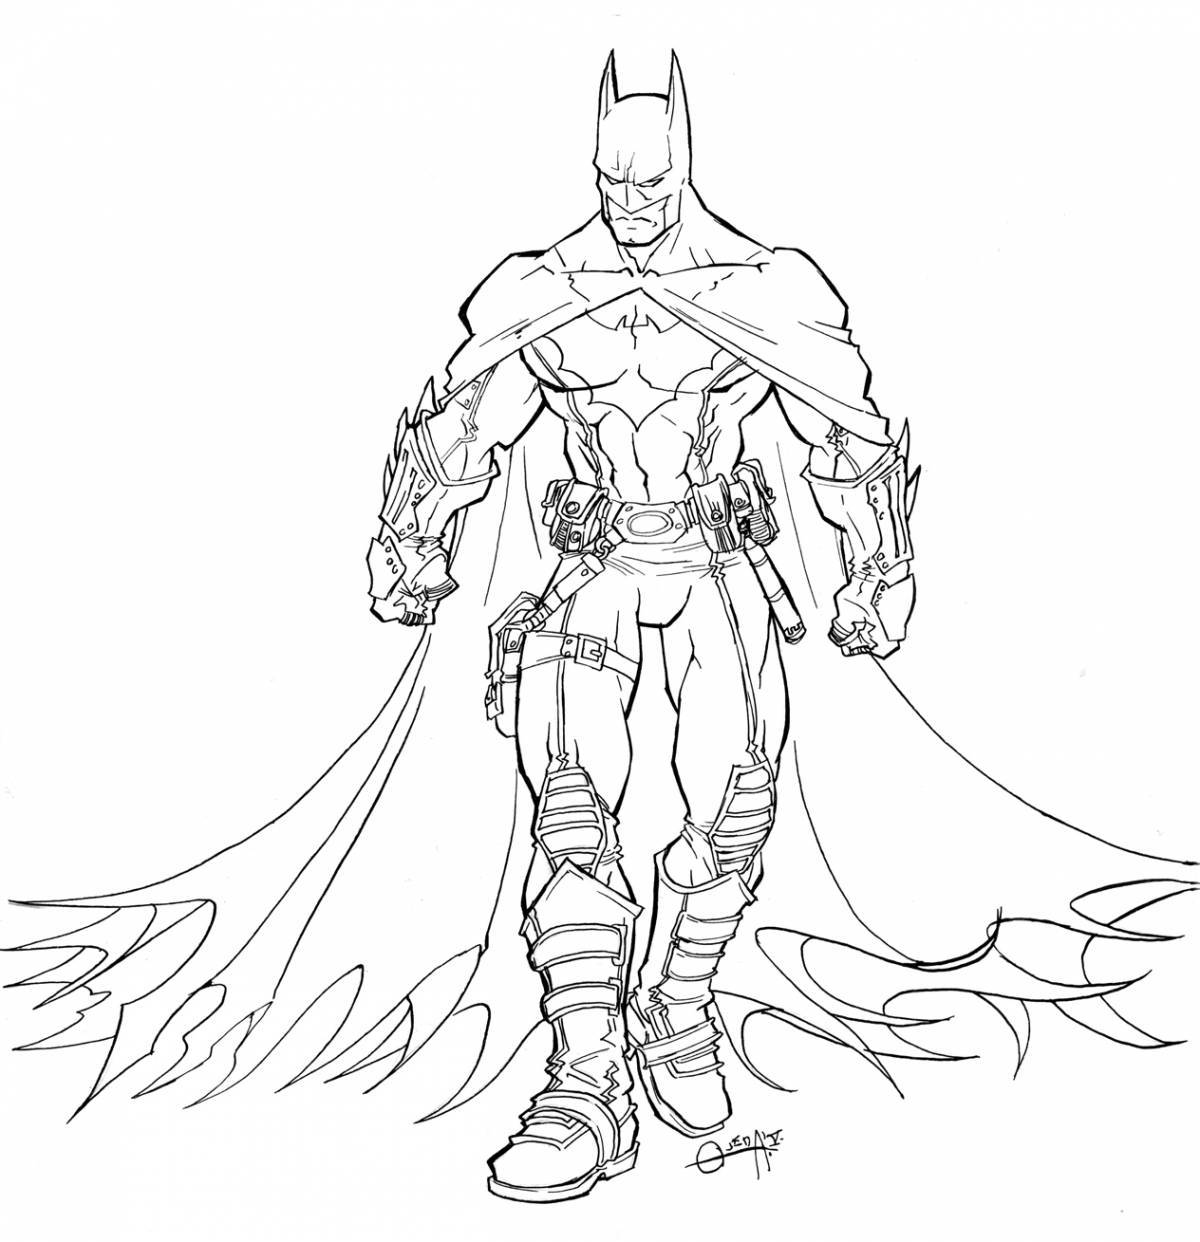 Awesome batman coloring book